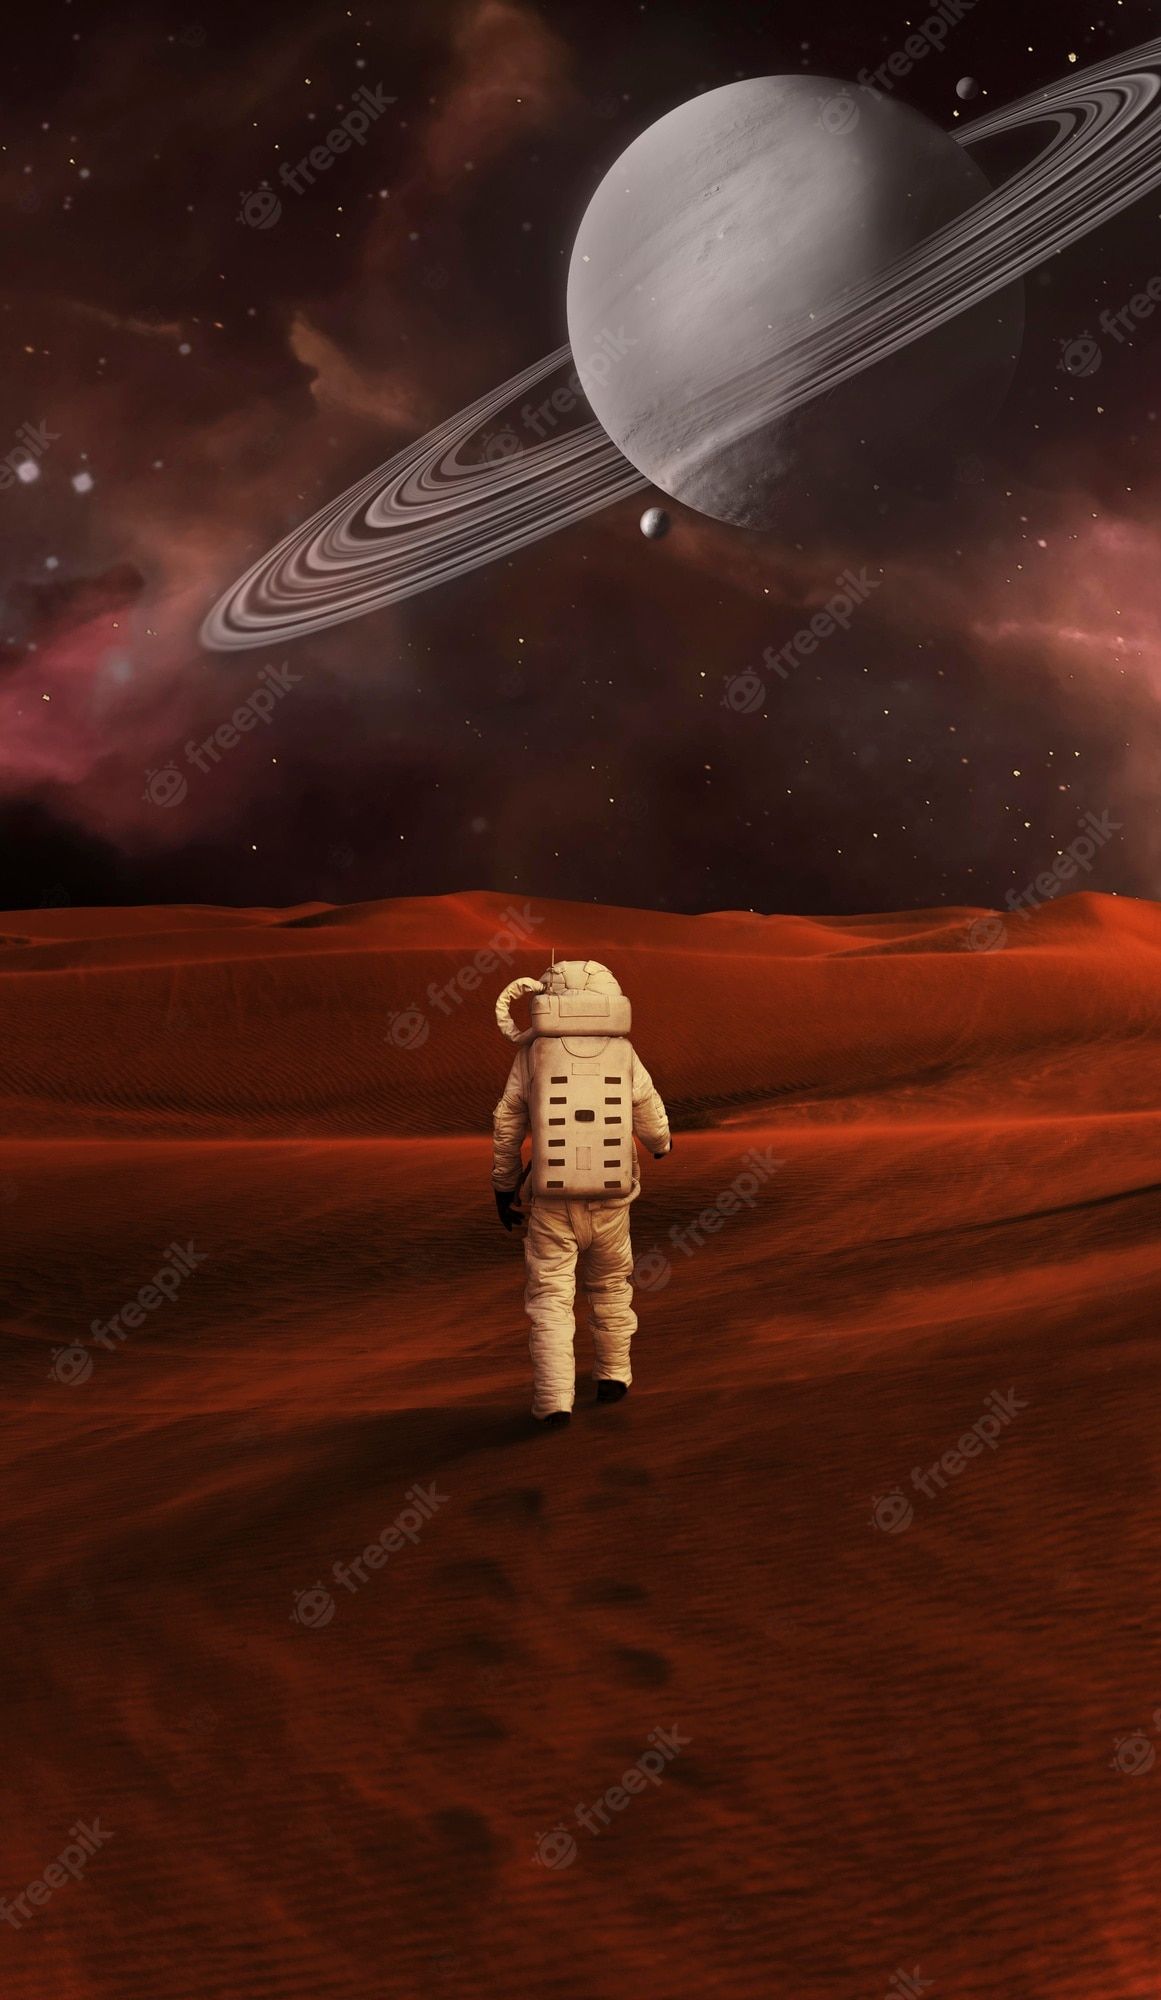 An astronaut walking on a planet with a planet in the background - Mars